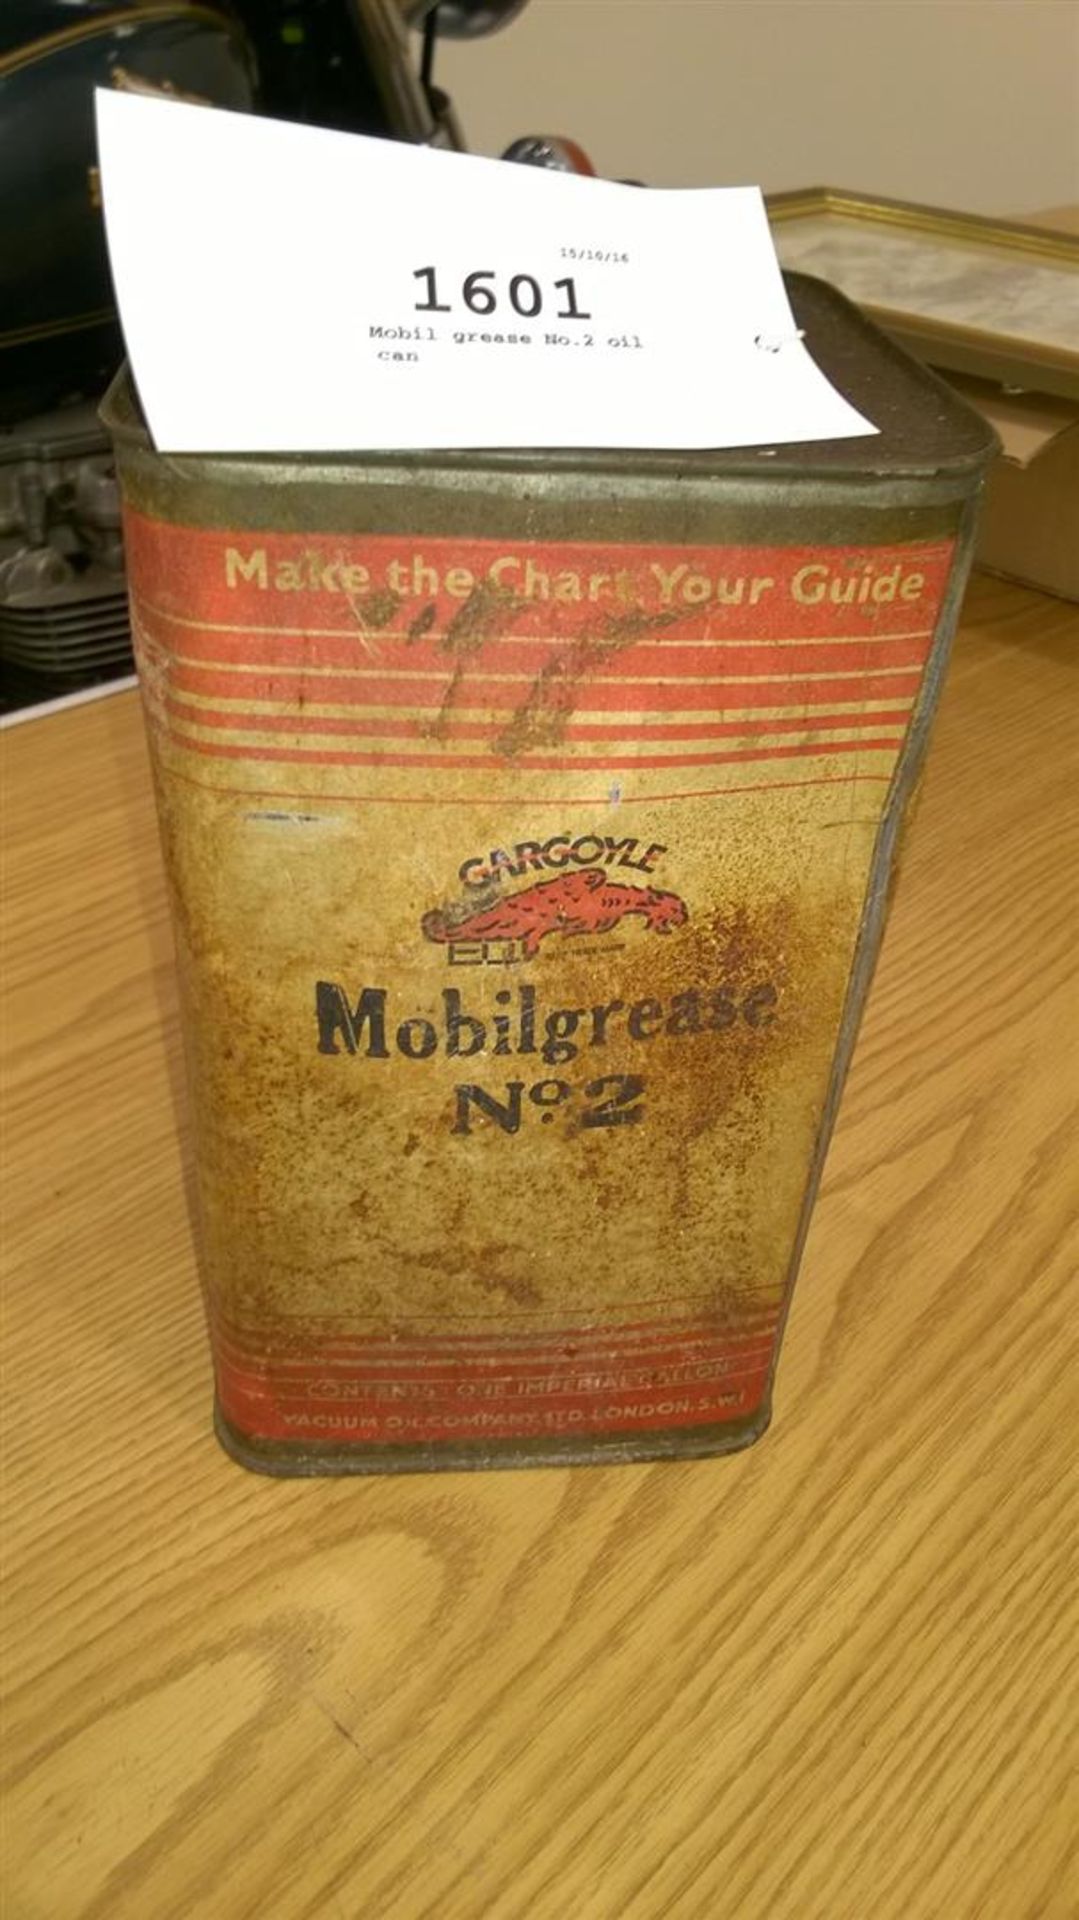 Mobil grease No.2 oil can